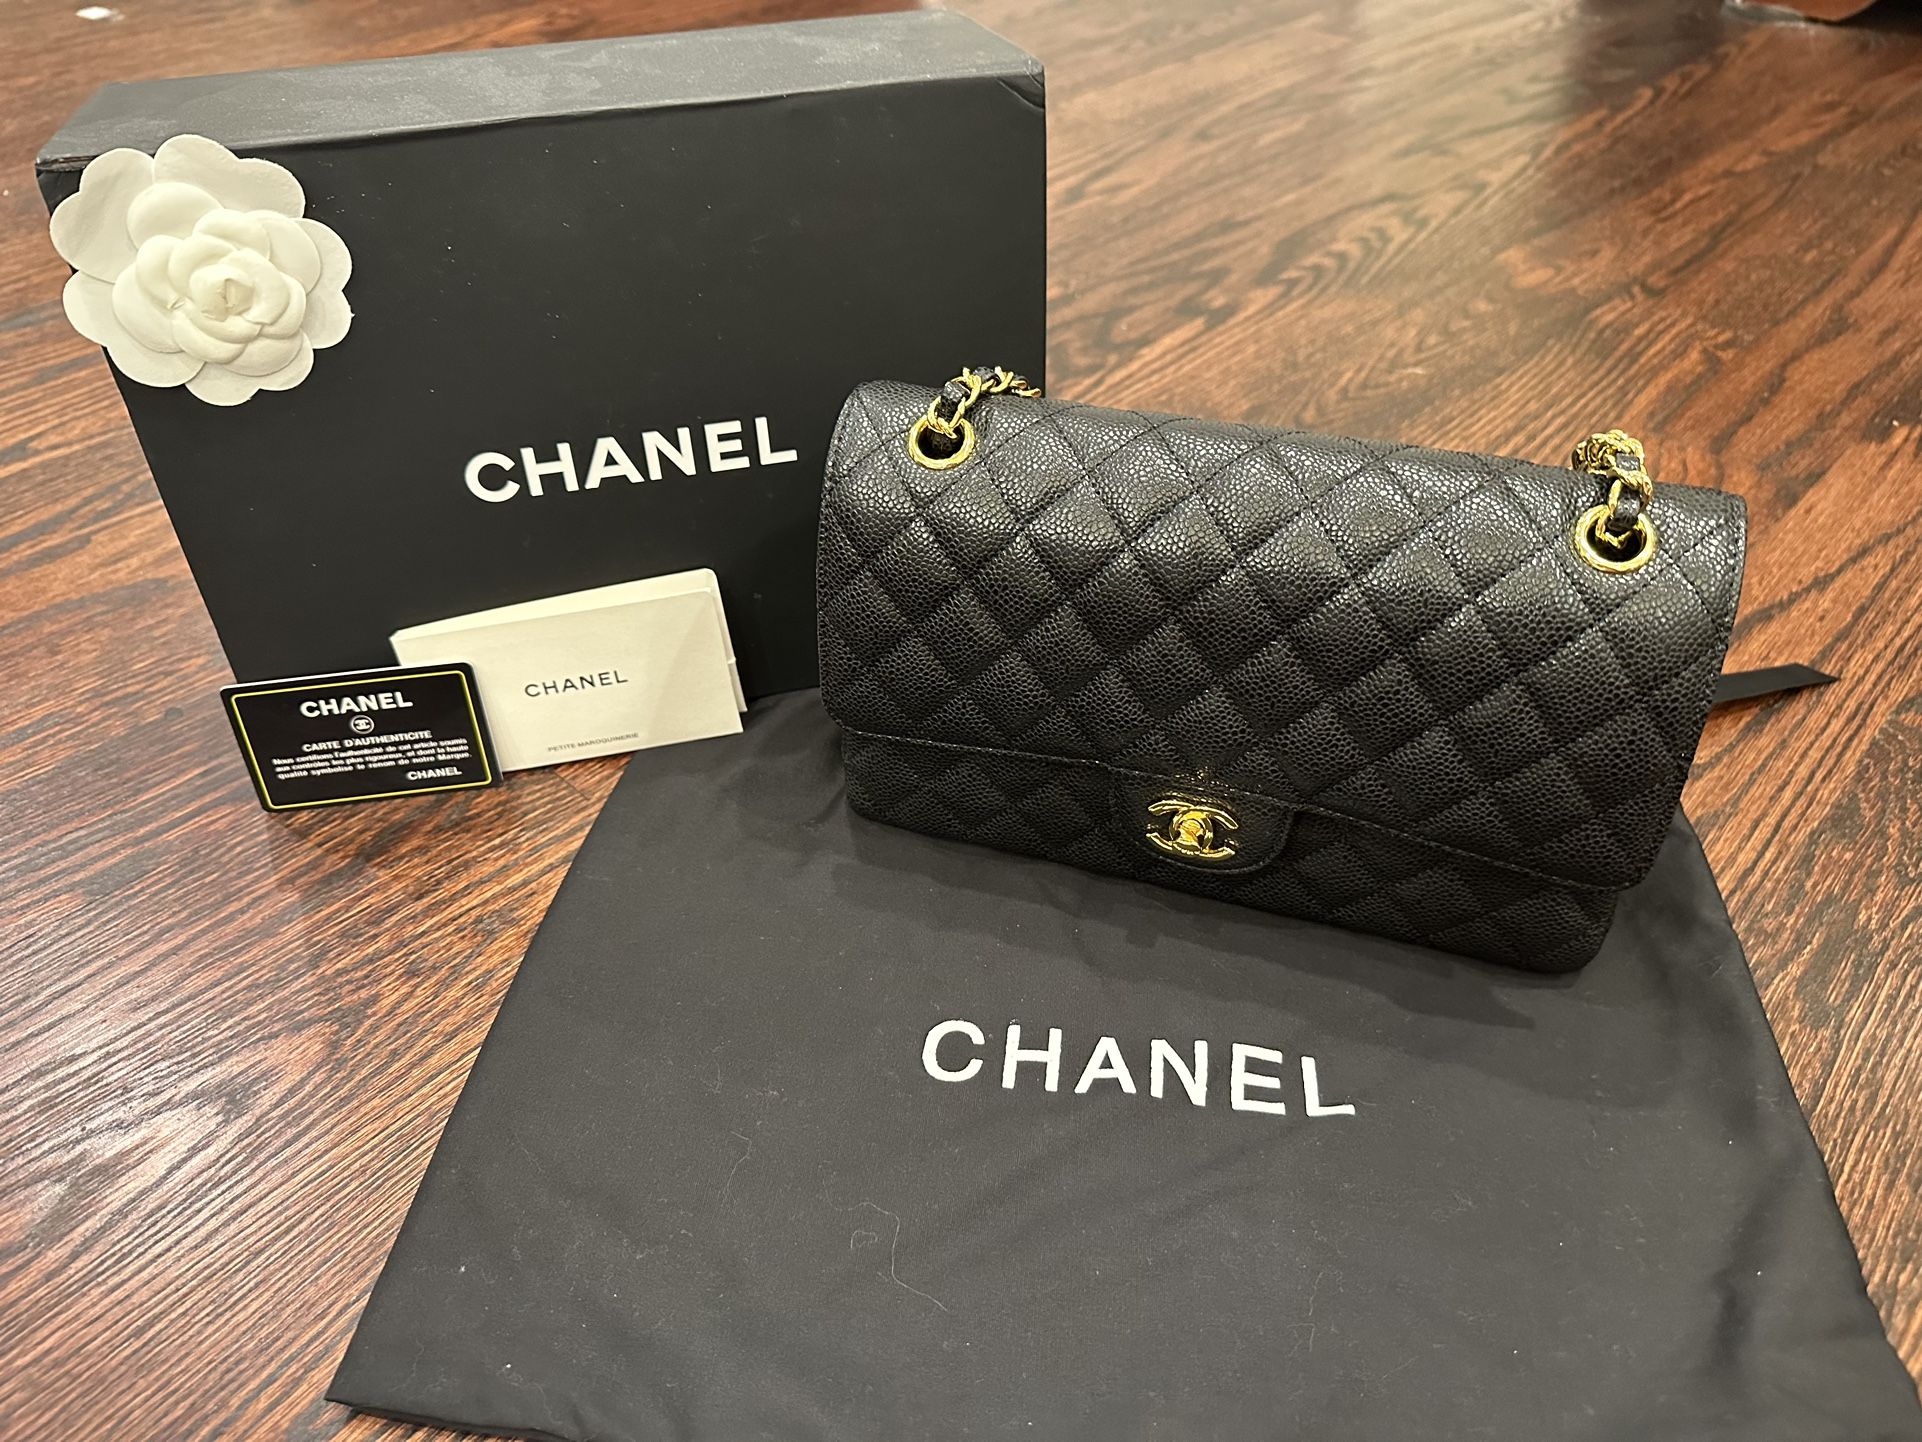 Chanel Classic Flap Maxi Bag for Sale in New York, NY - OfferUp